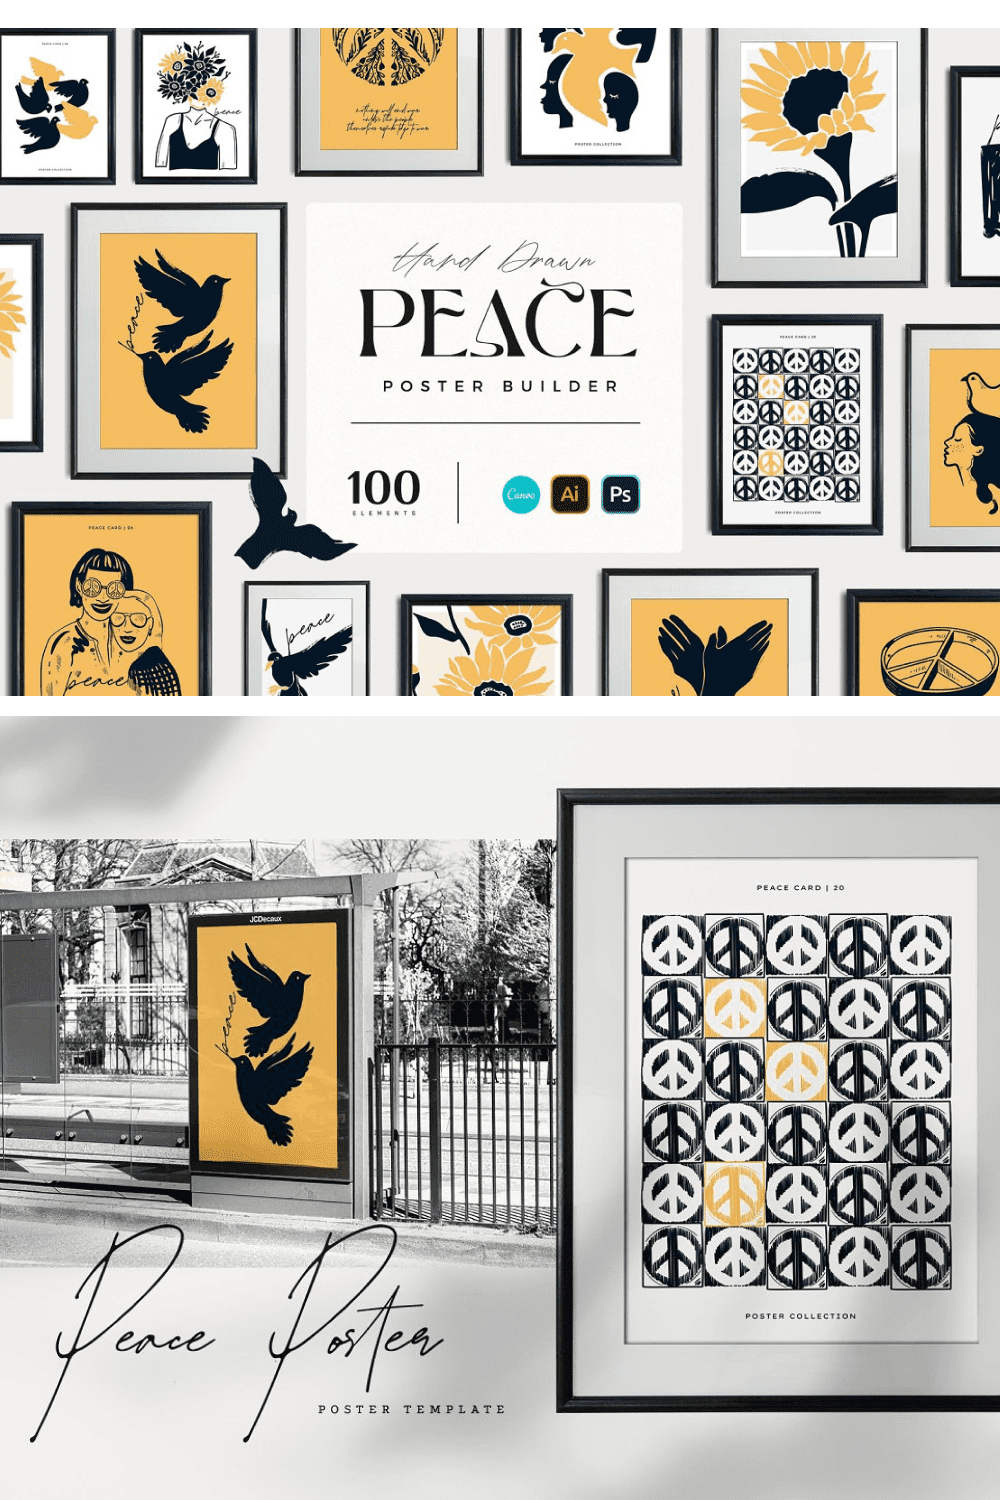 Peace poster builder - pinterest image preview.